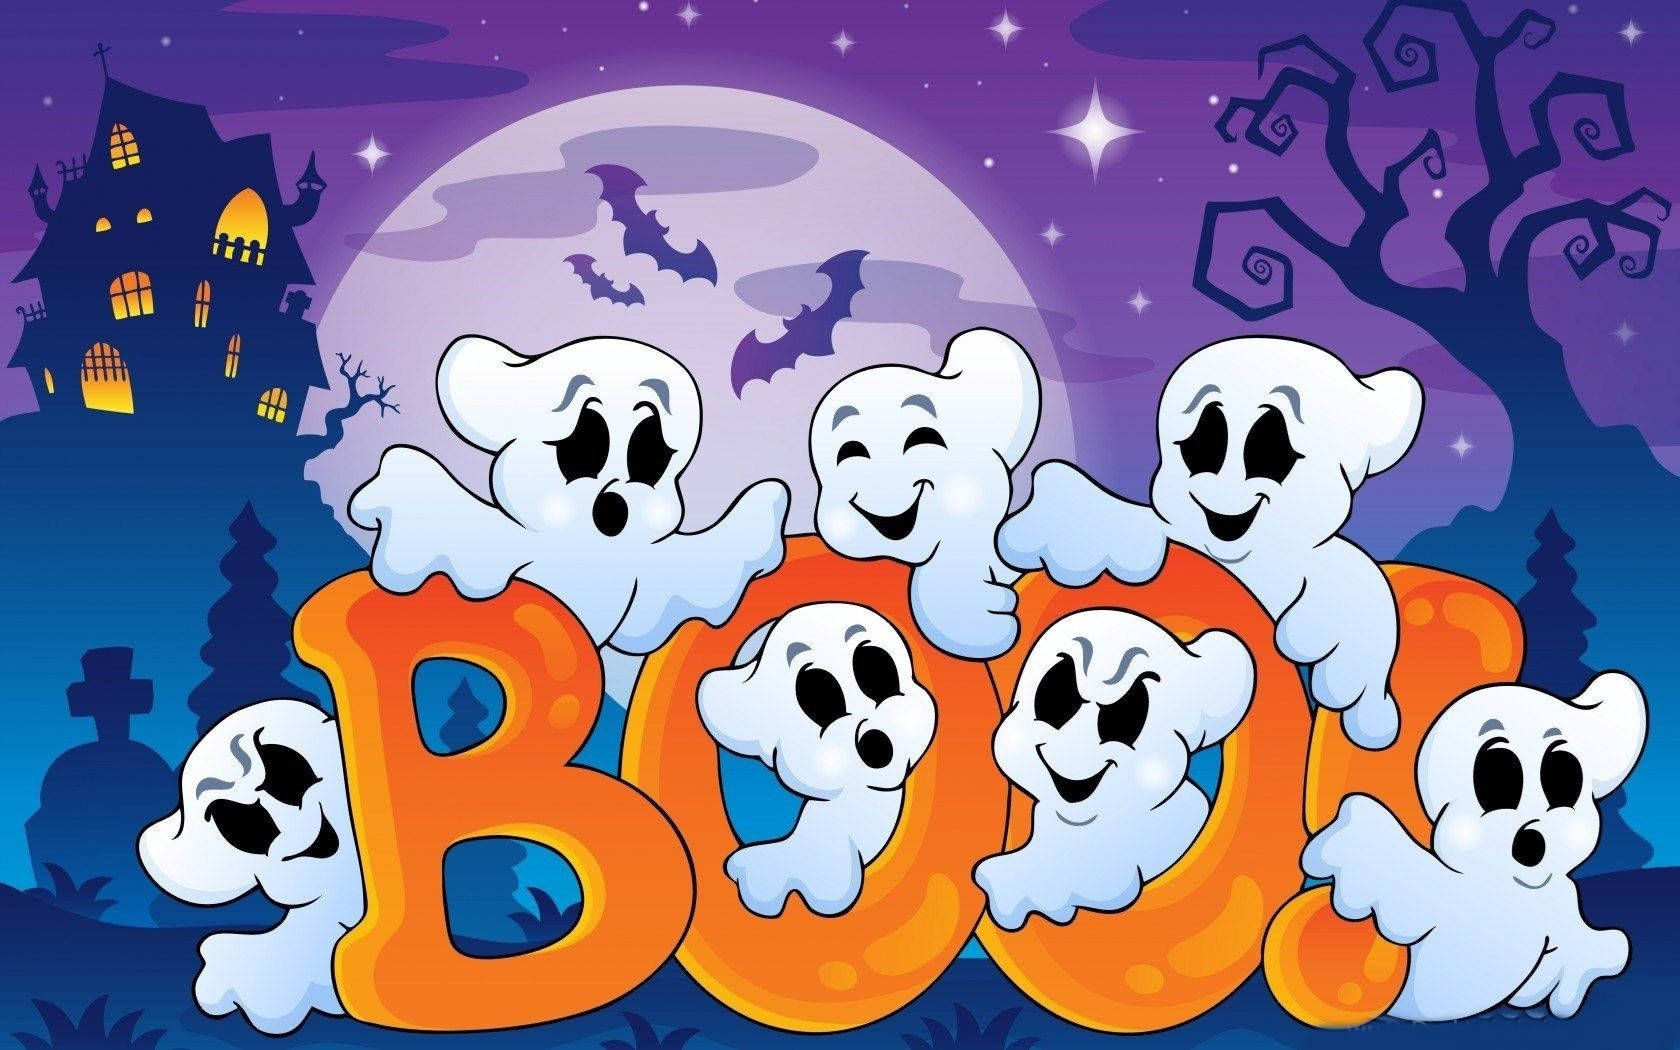 Get in the spooky spirit on Halloween night with your iPad! Wallpaper